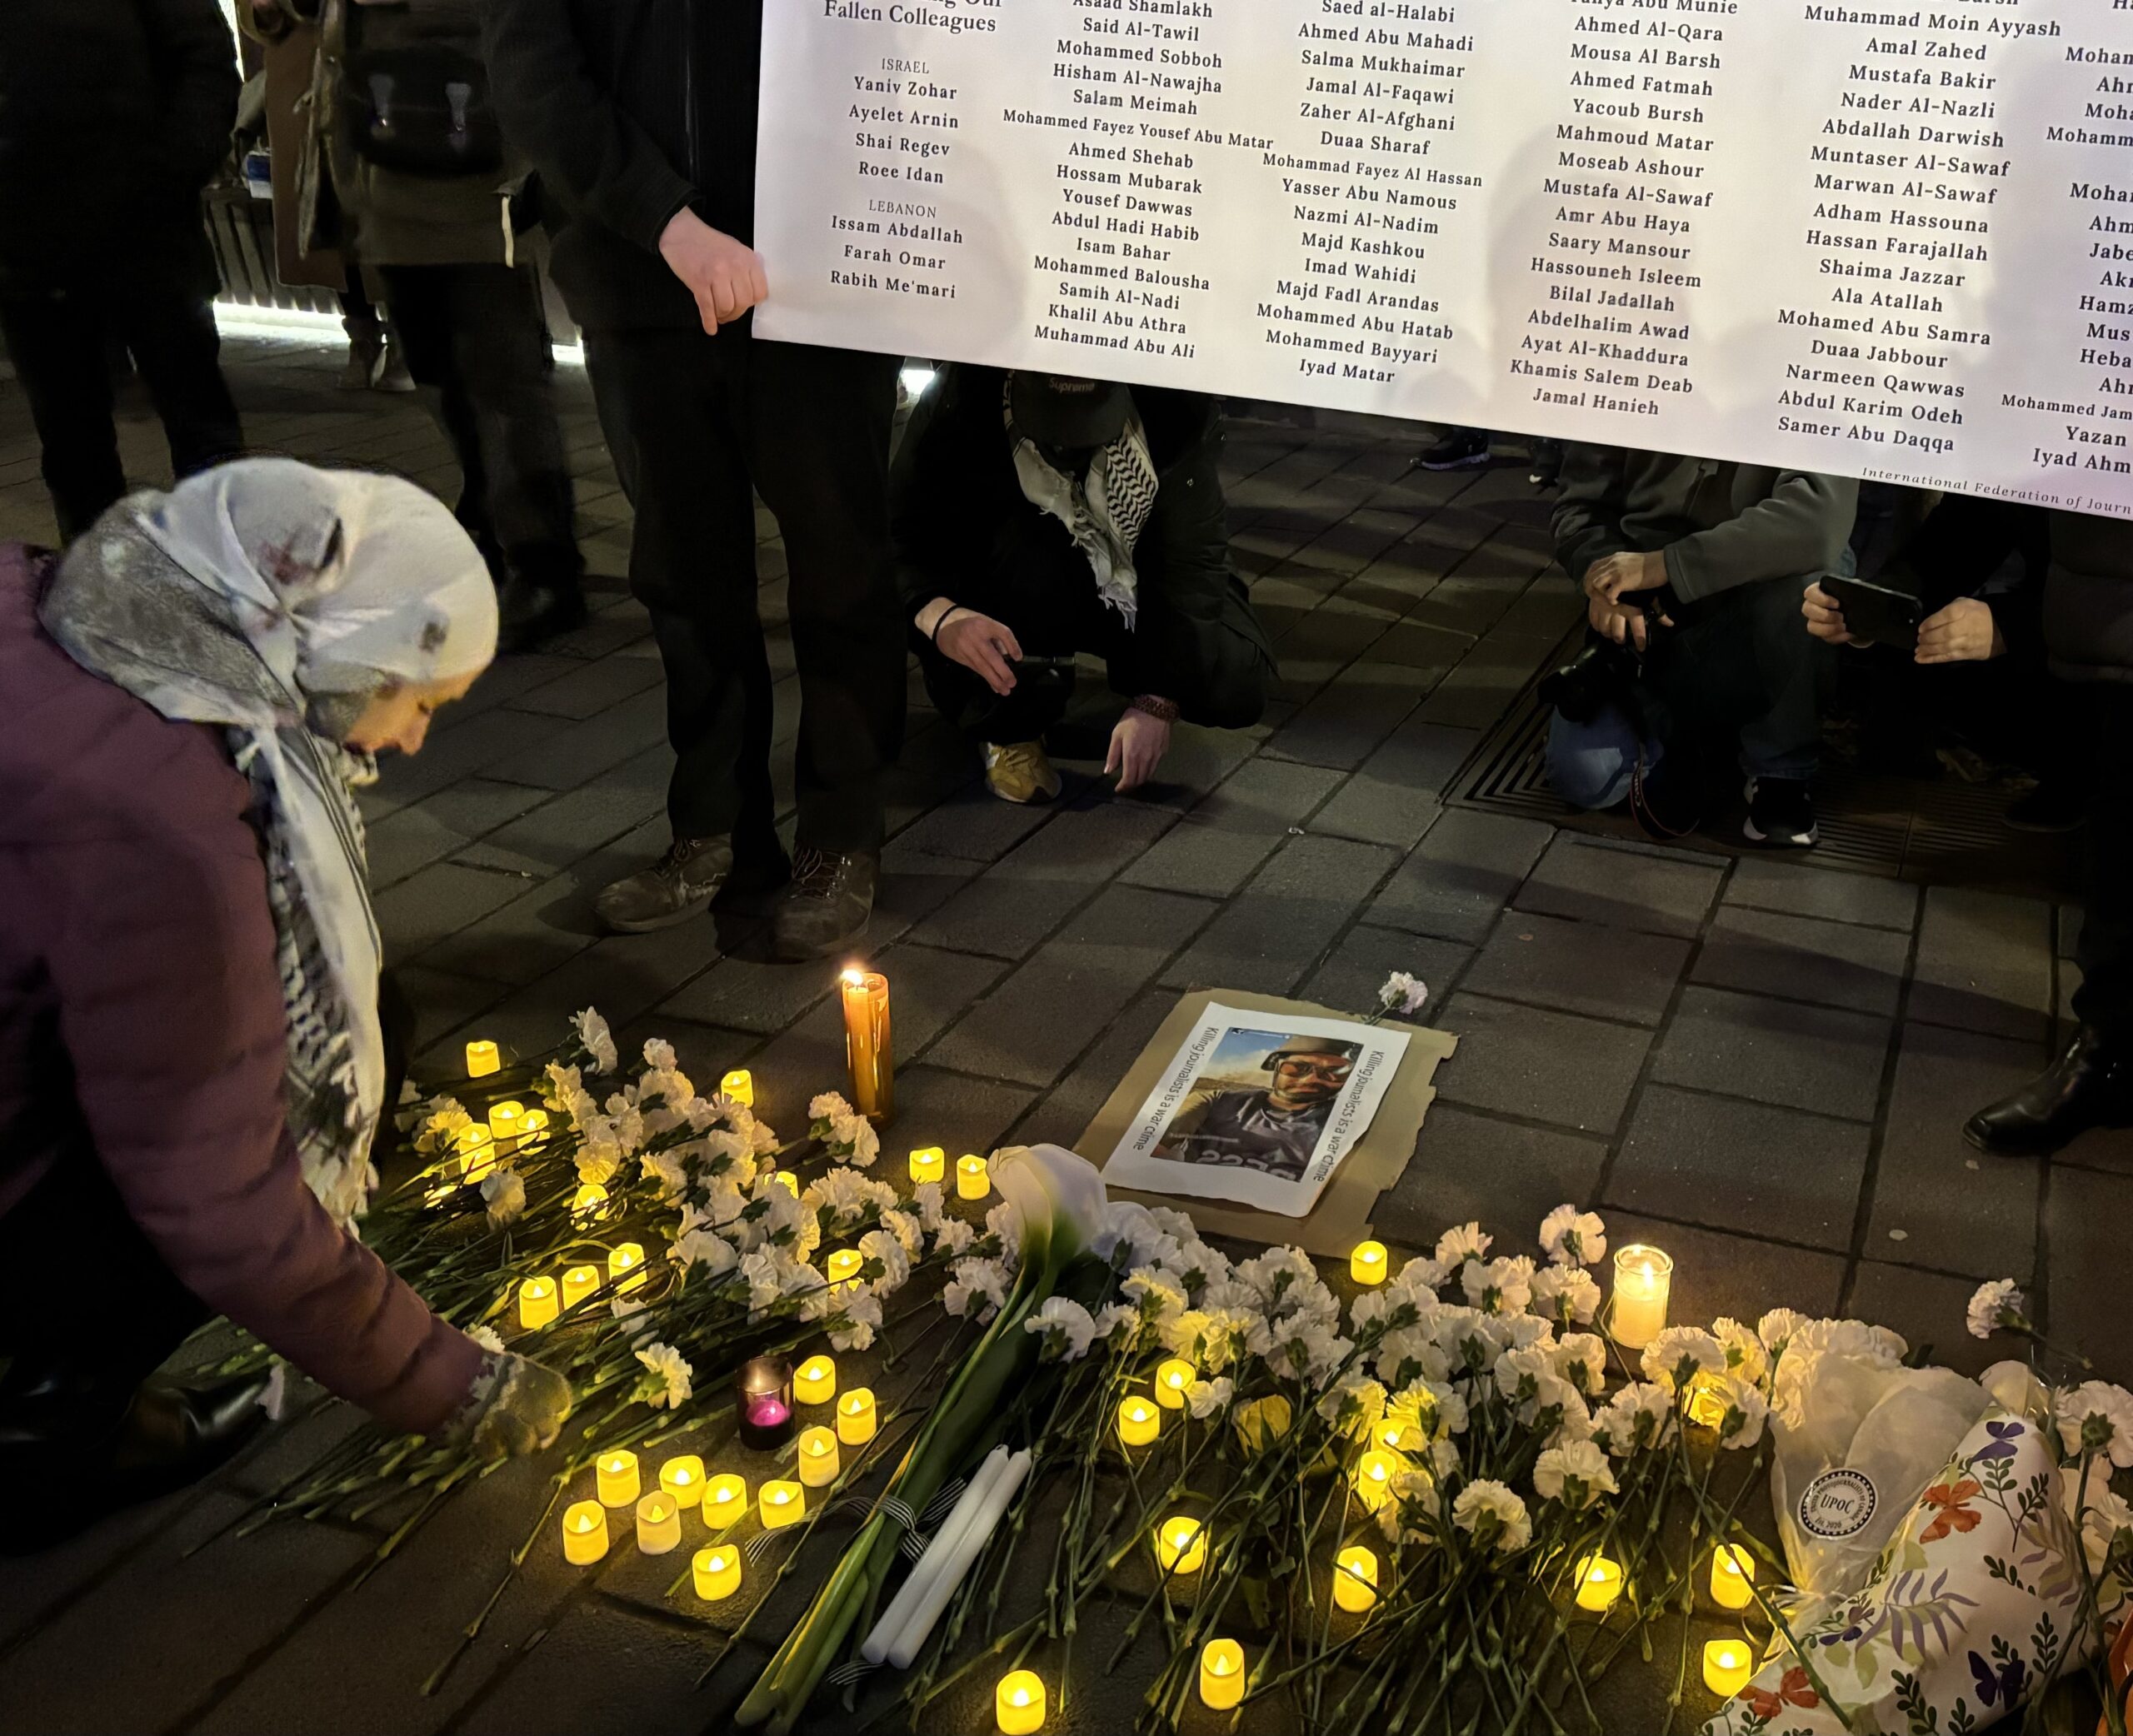 In this photo a woman is putting a flower down at a vigil for slain Palestininan, Lebanese and Israeli journalists. She is bending down in front of a poster carried by two people with all the journalists' names on it.